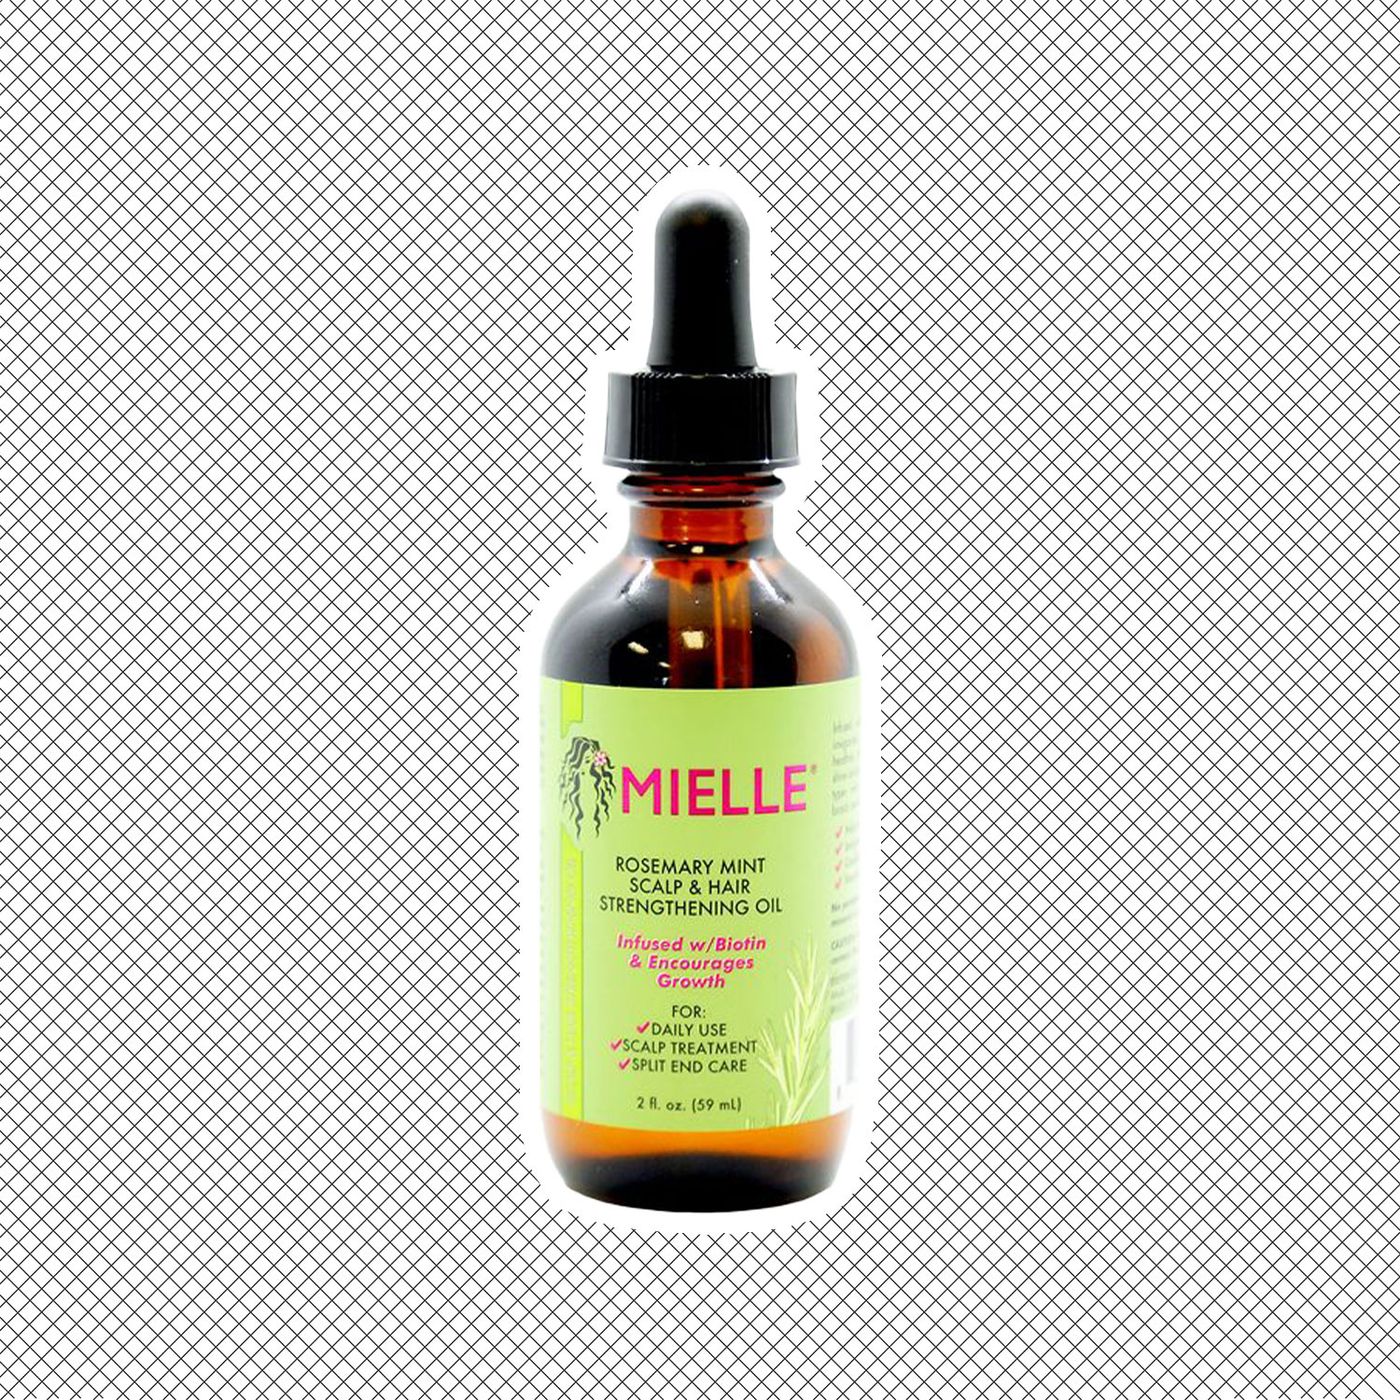 Mielle Organics' $11 Viral Scalp and Hair Oil Is a Game-Changing Treatment